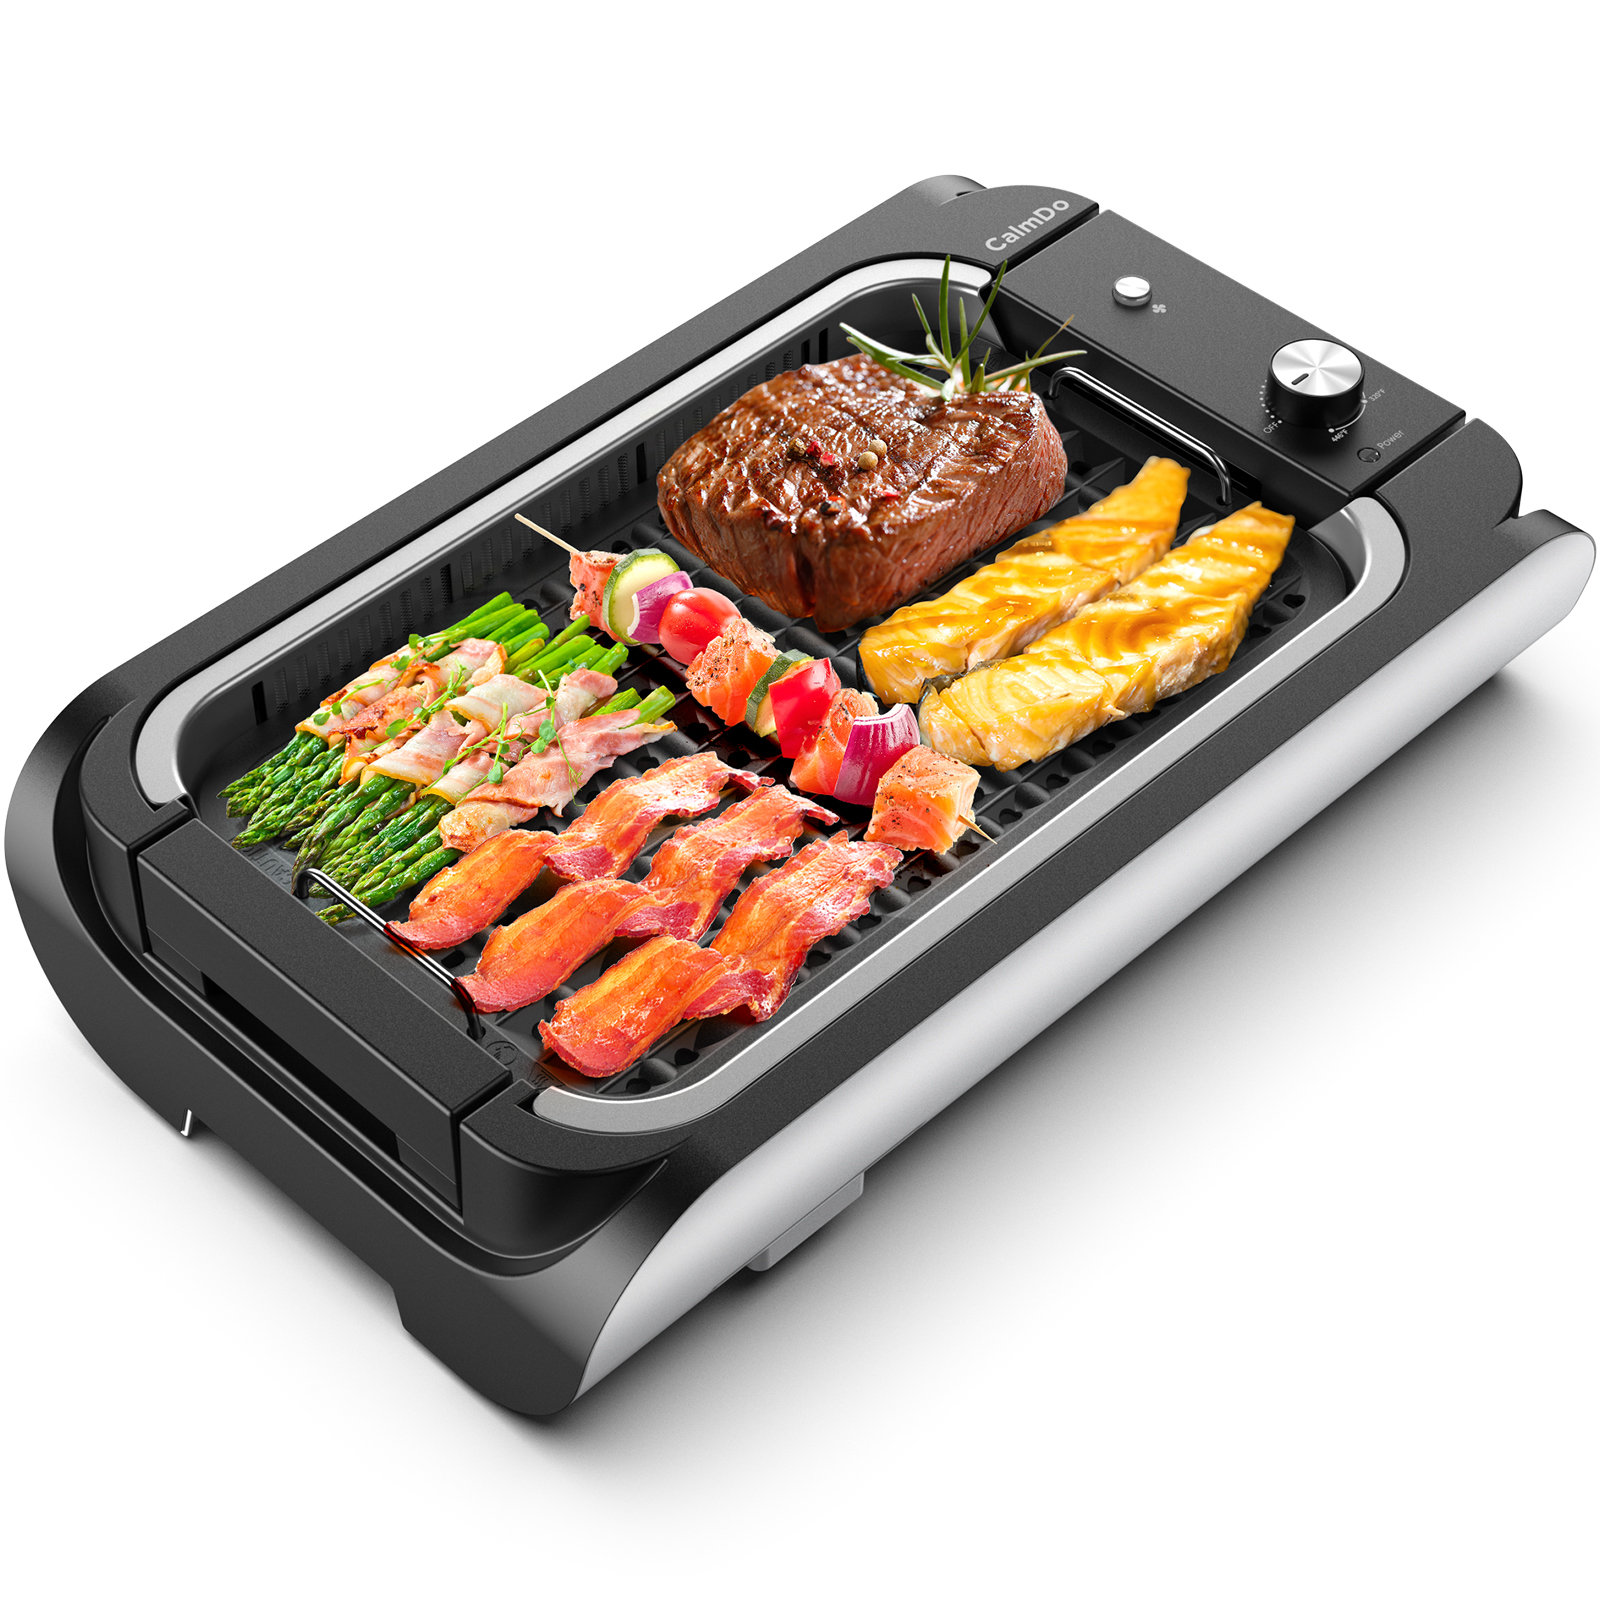 Calmdo Electric Grill, Indoor Smokeless Grill with Glass Lid, 2 Non-Stick  Plates, Dishwasher Safe & Reviews